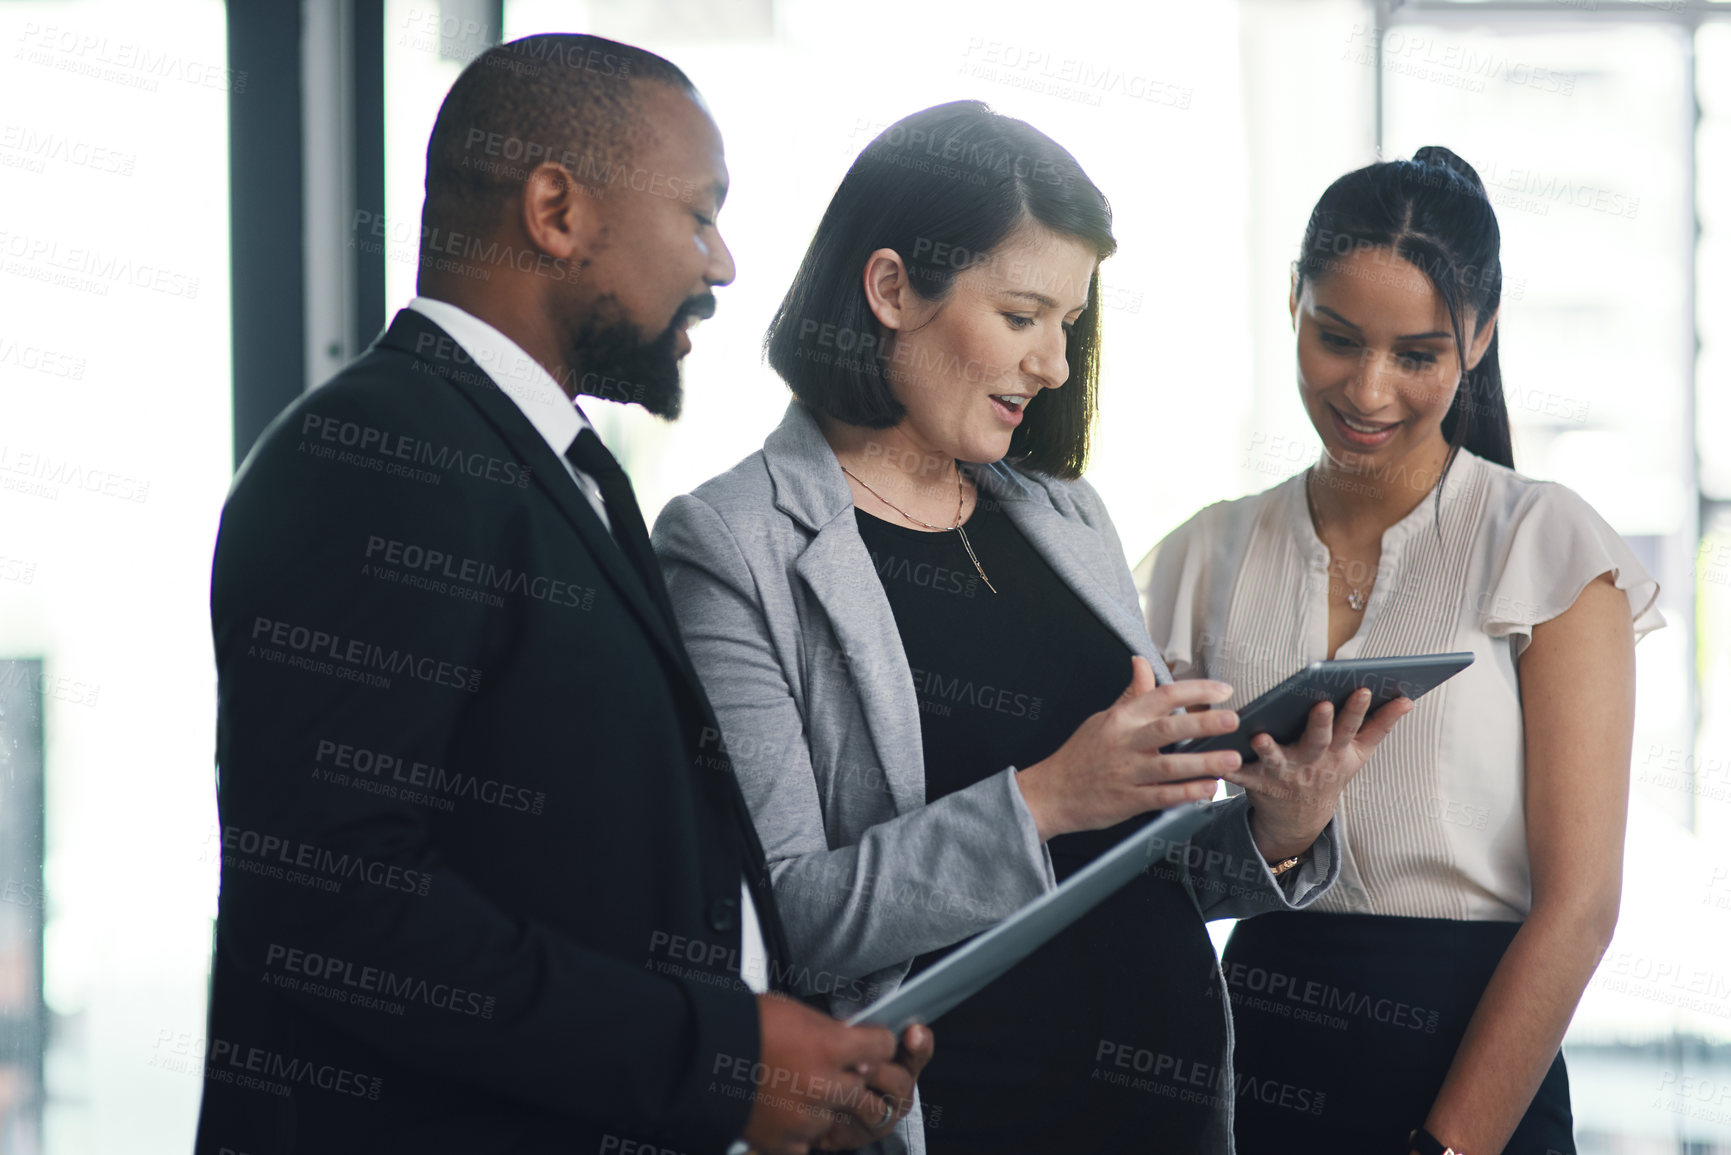 Buy stock photo Shot of a group of businesspeople using a digital tablet during a meeting in a modern office